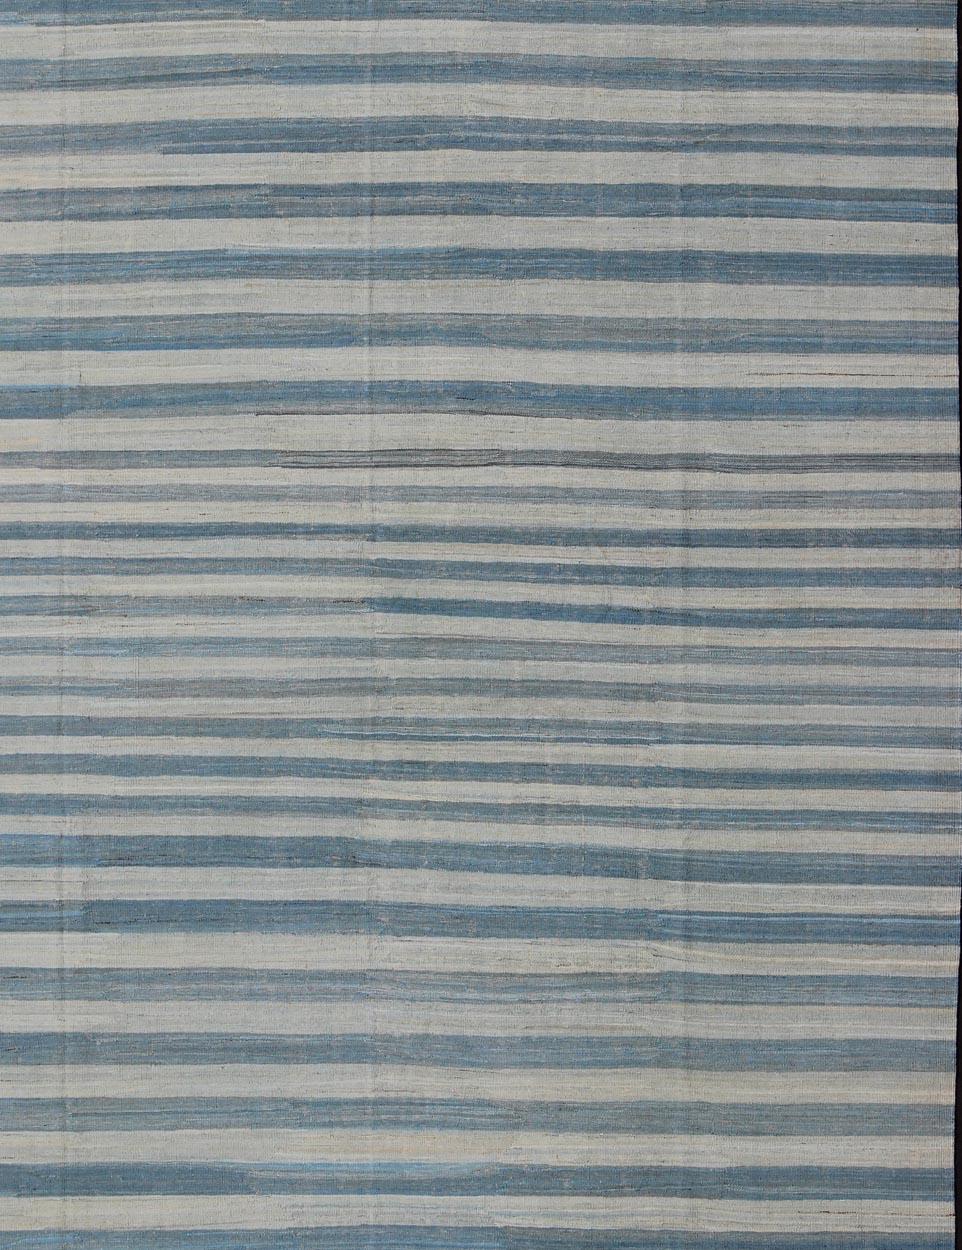 Hand-Woven Flat-Weave Modern Kilim Rug with Stripes in Shades of Blue, Taupe Gray and Ivory